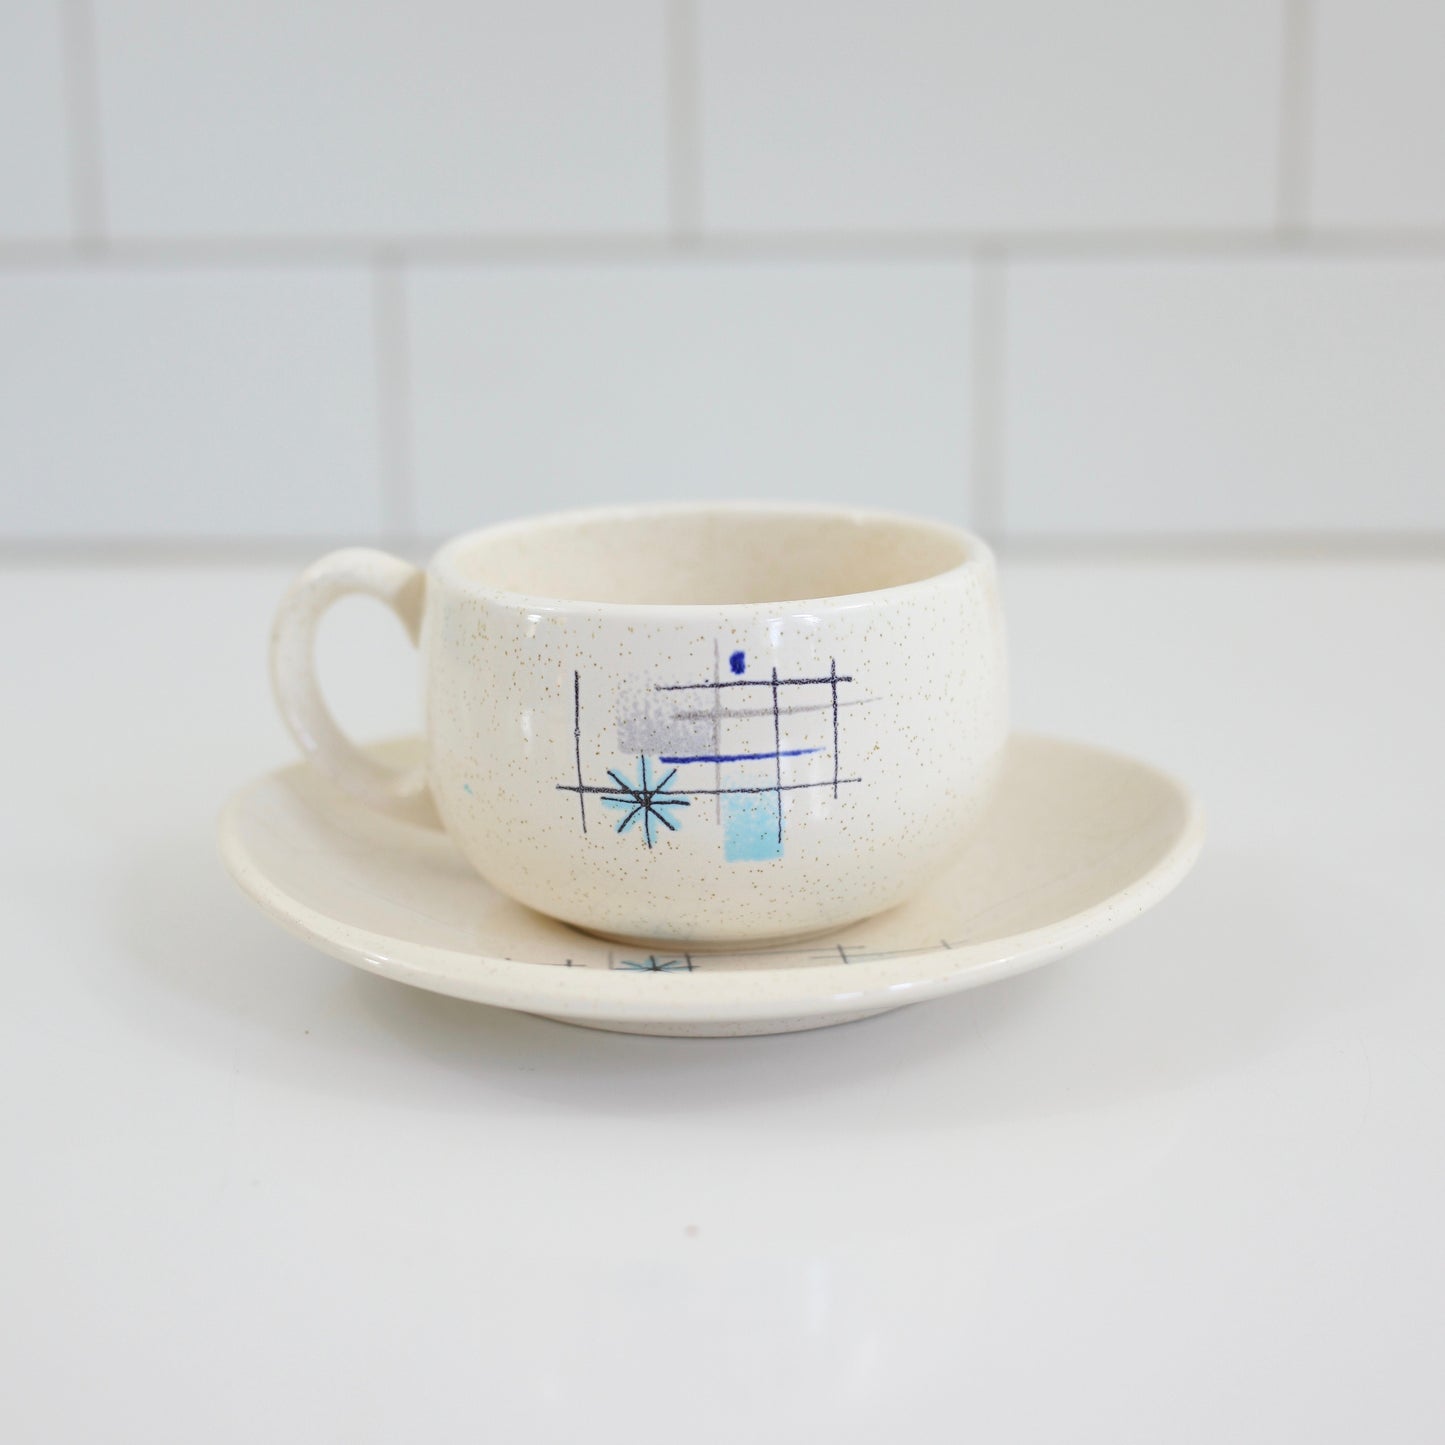 SOLD - Mid Century Modern Franciscan 'Oasis' Atomic Starburst Cup and Saucer